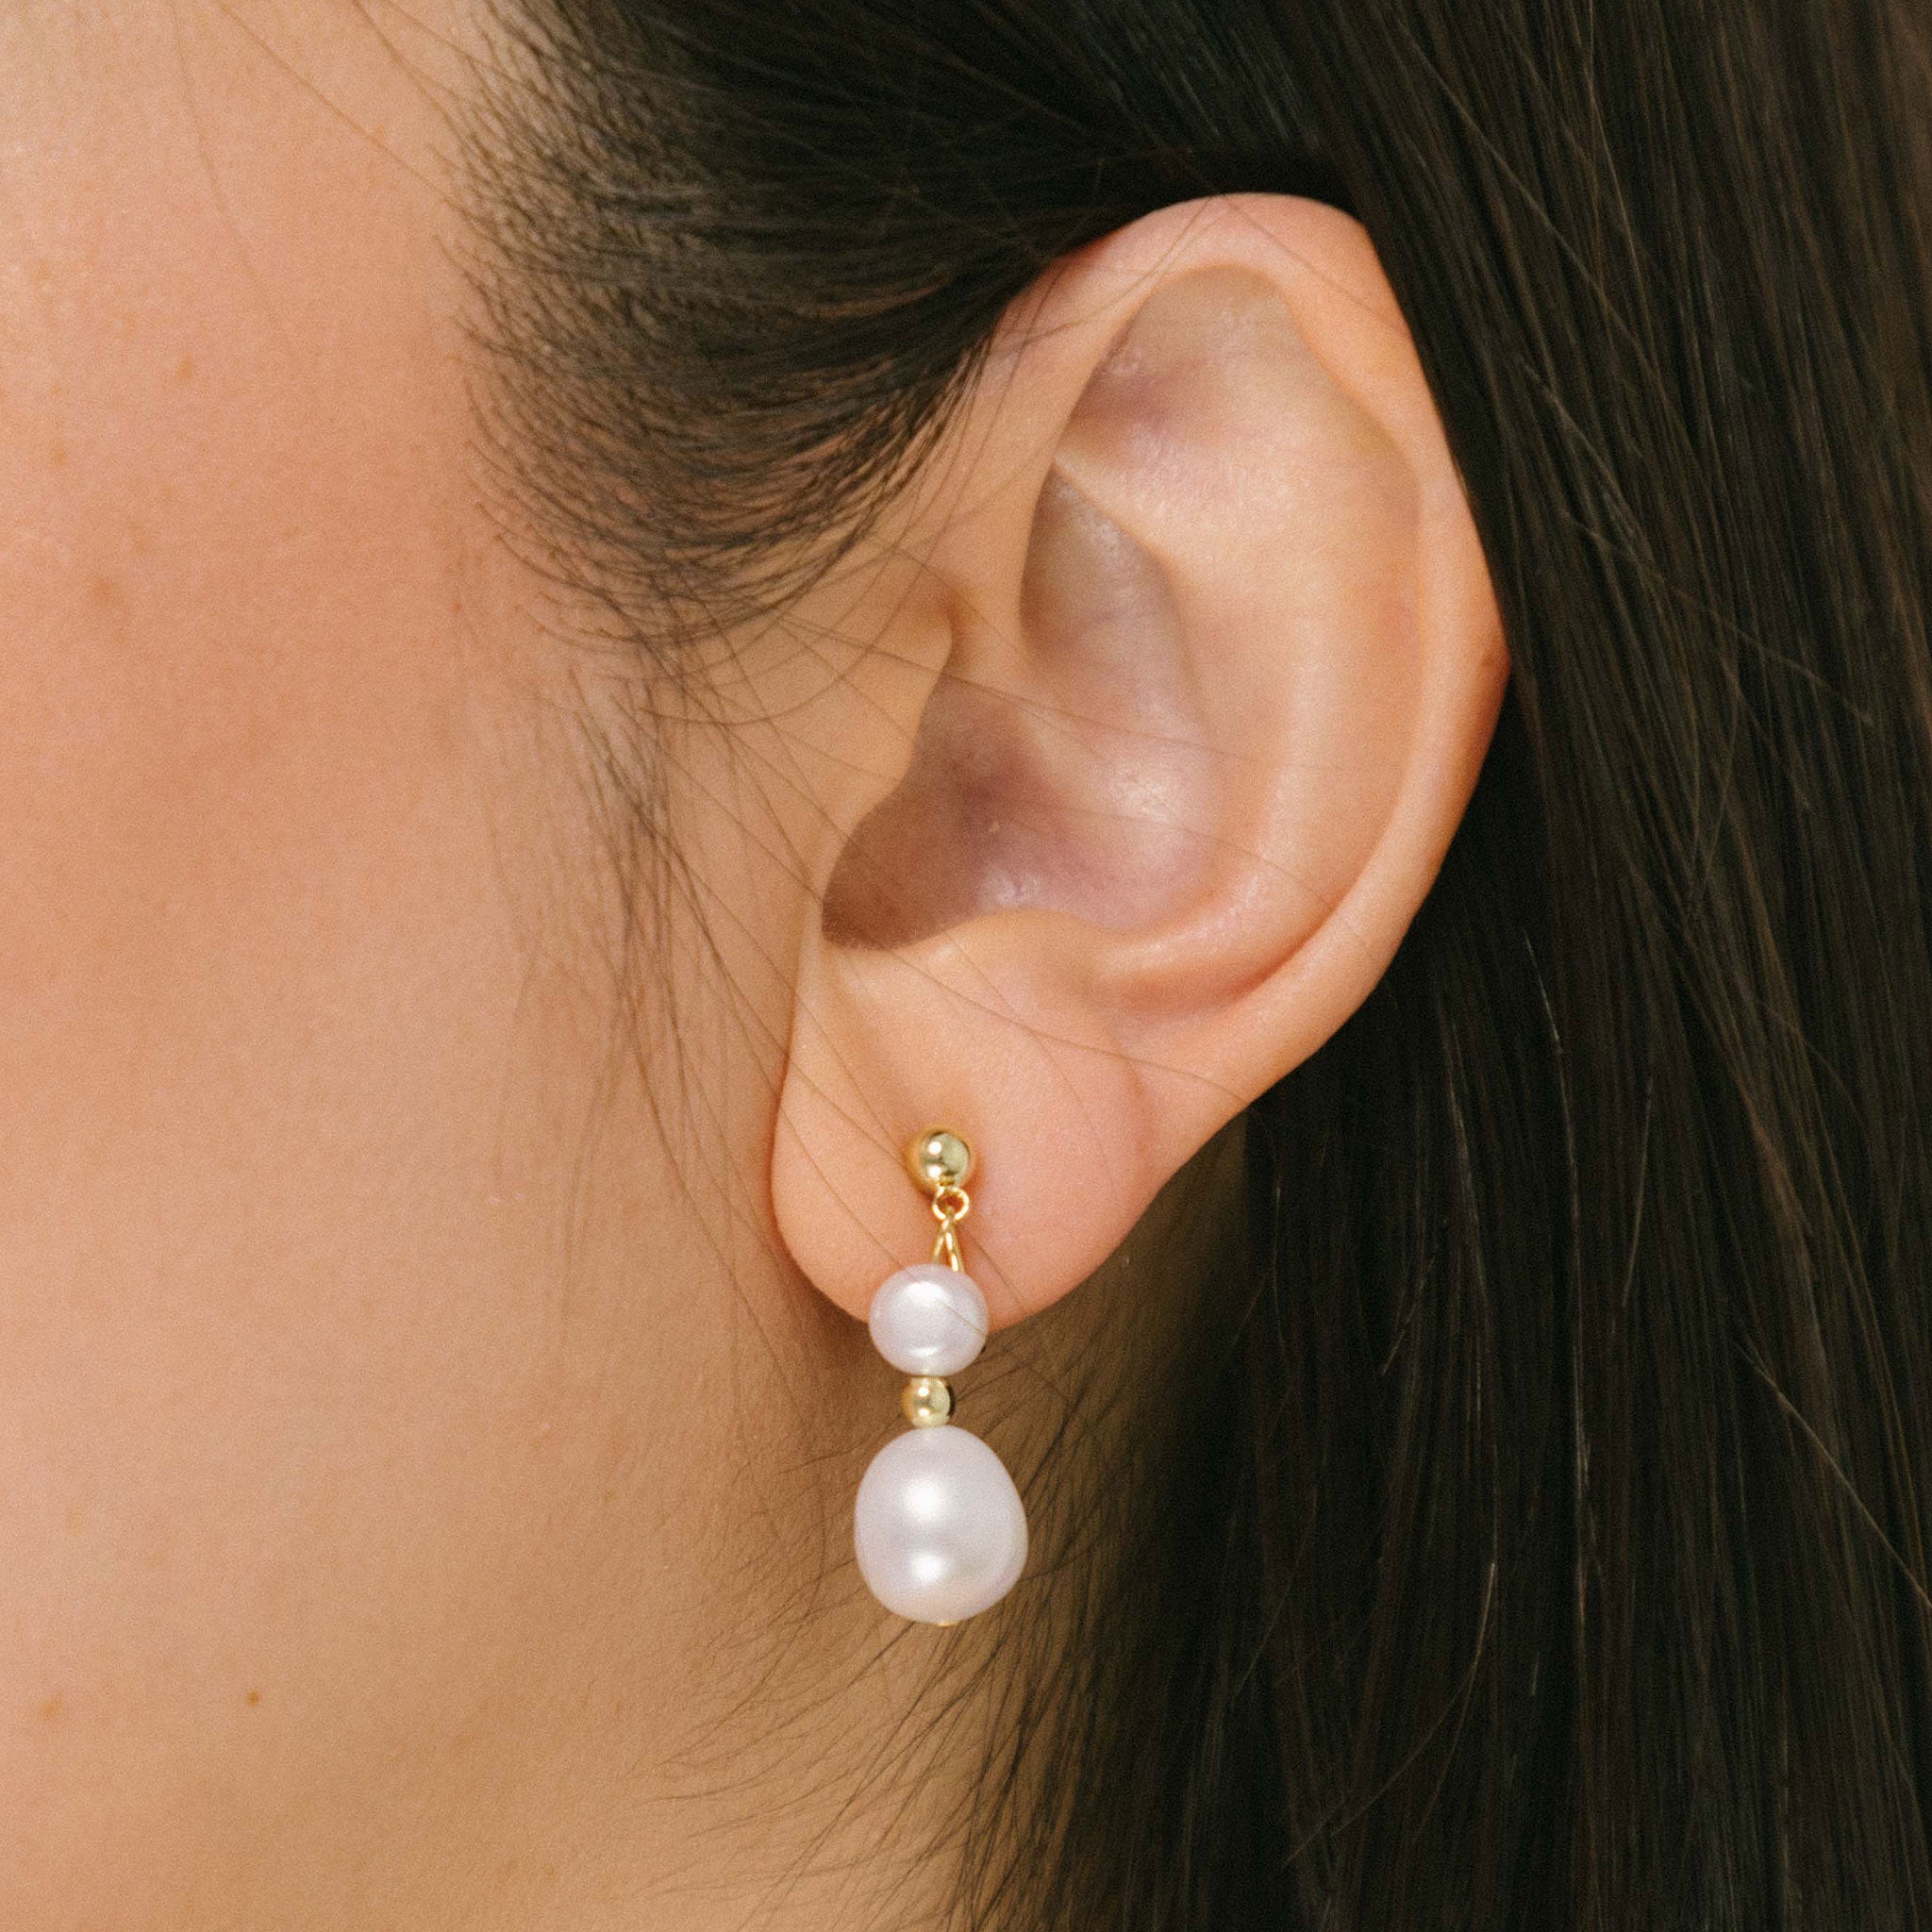 A model wearing the Duo Pearl Clip-On Earrings in Gold feature a mosquito coil clip-on closure ideal for all ear types. Enjoy medium secure hold and comfortable wear for up to 24 hours - gently squeezing the padding forward once on the ear for adjustable fit. Crafted with freshwater pearls and 18K gold plated stainless steel, each piece features unique natural variations in size and colour.